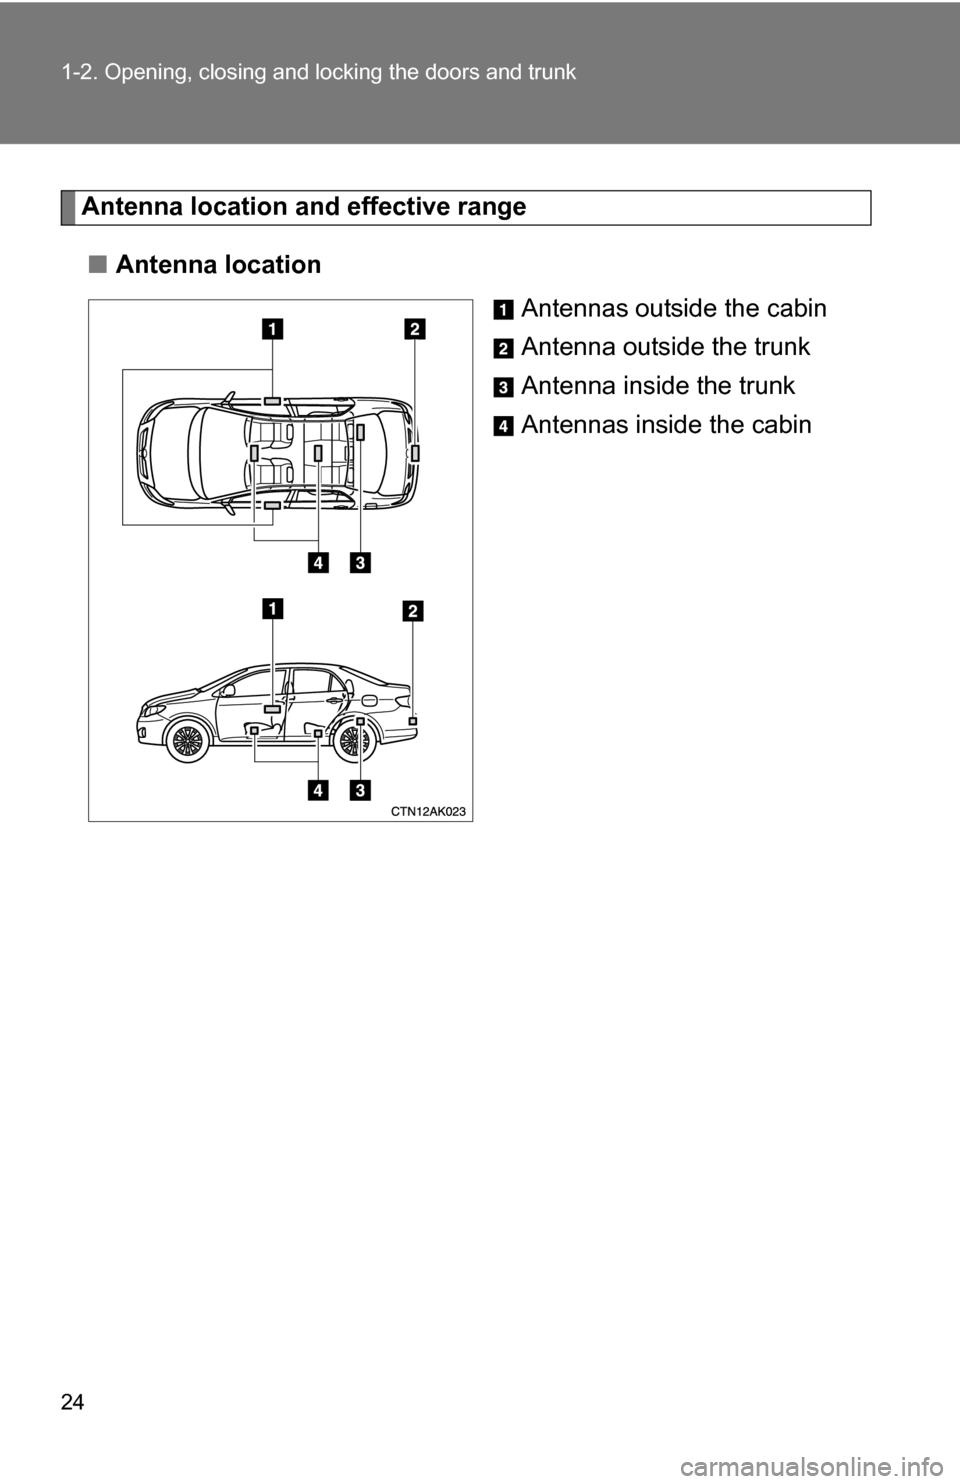 TOYOTA COROLLA 2009 10.G Owners Manual 24 1-2. Opening, closing and locking the doors and trunk
Antenna location and effective range
■ Antenna location
Antennas outside the cabin
Antenna outside the trunk
Antenna inside the trunk
Antenna